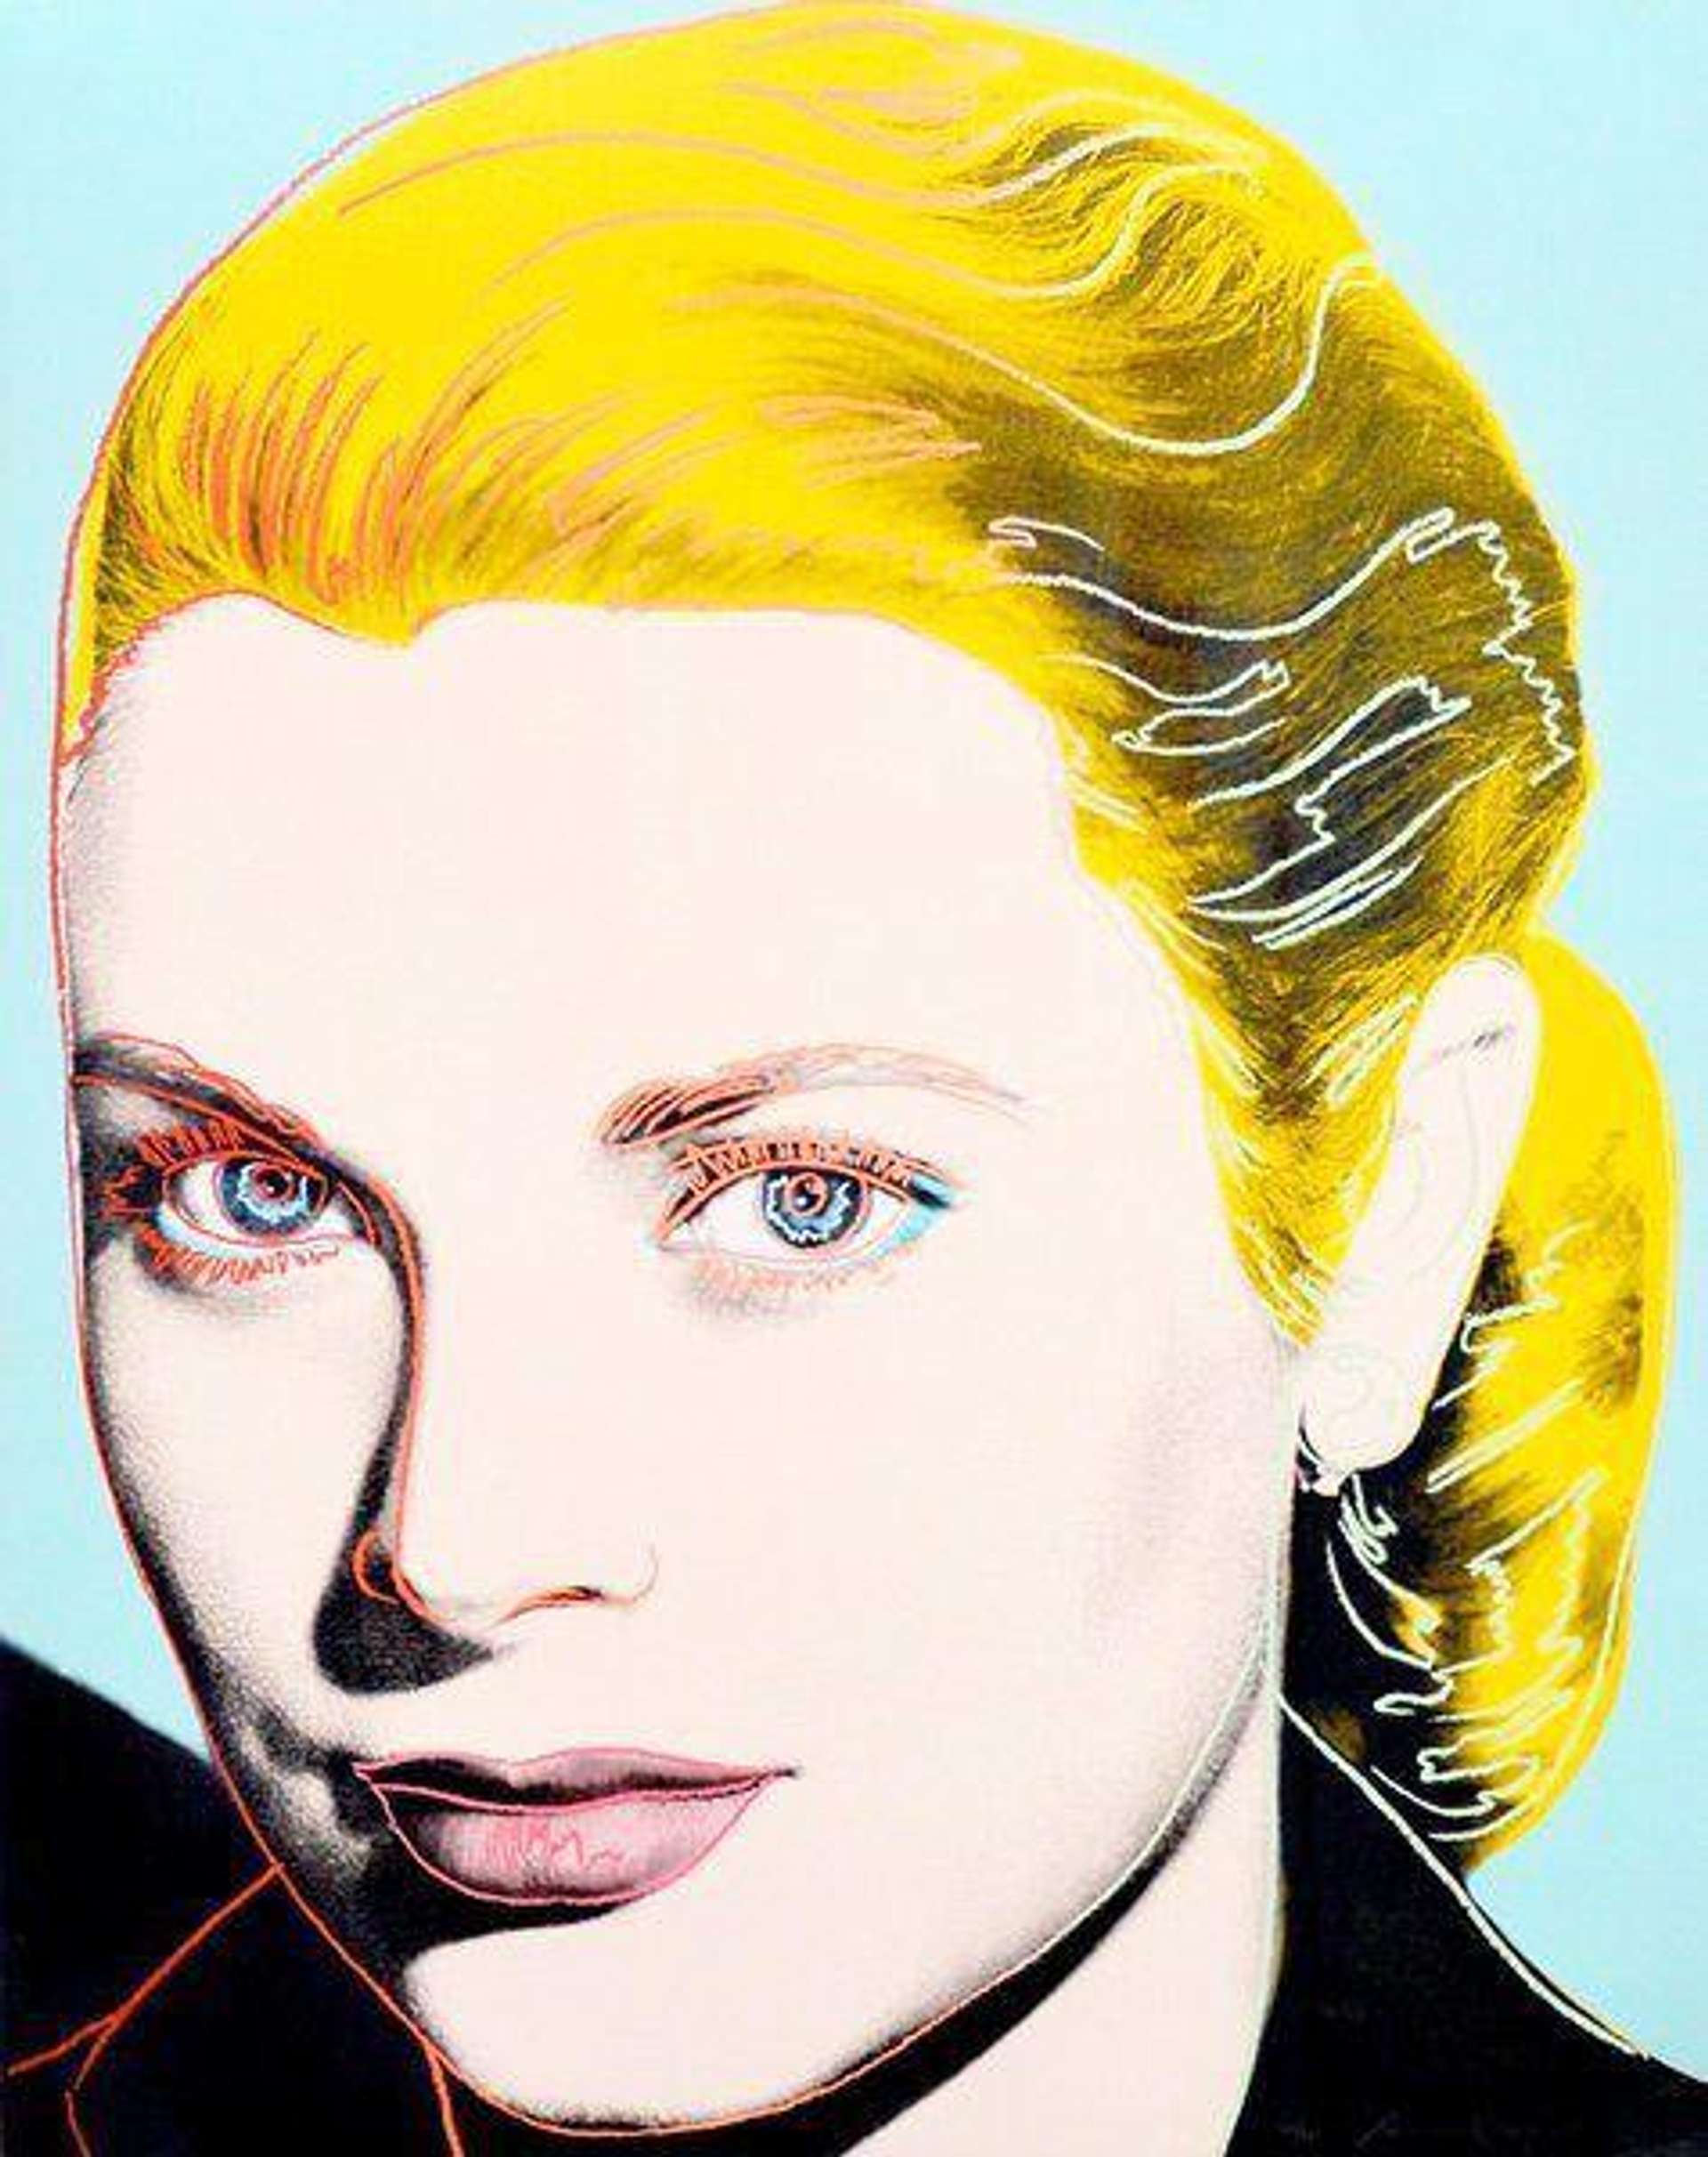 The Expert Guide To Buying Andy Warhol Prints